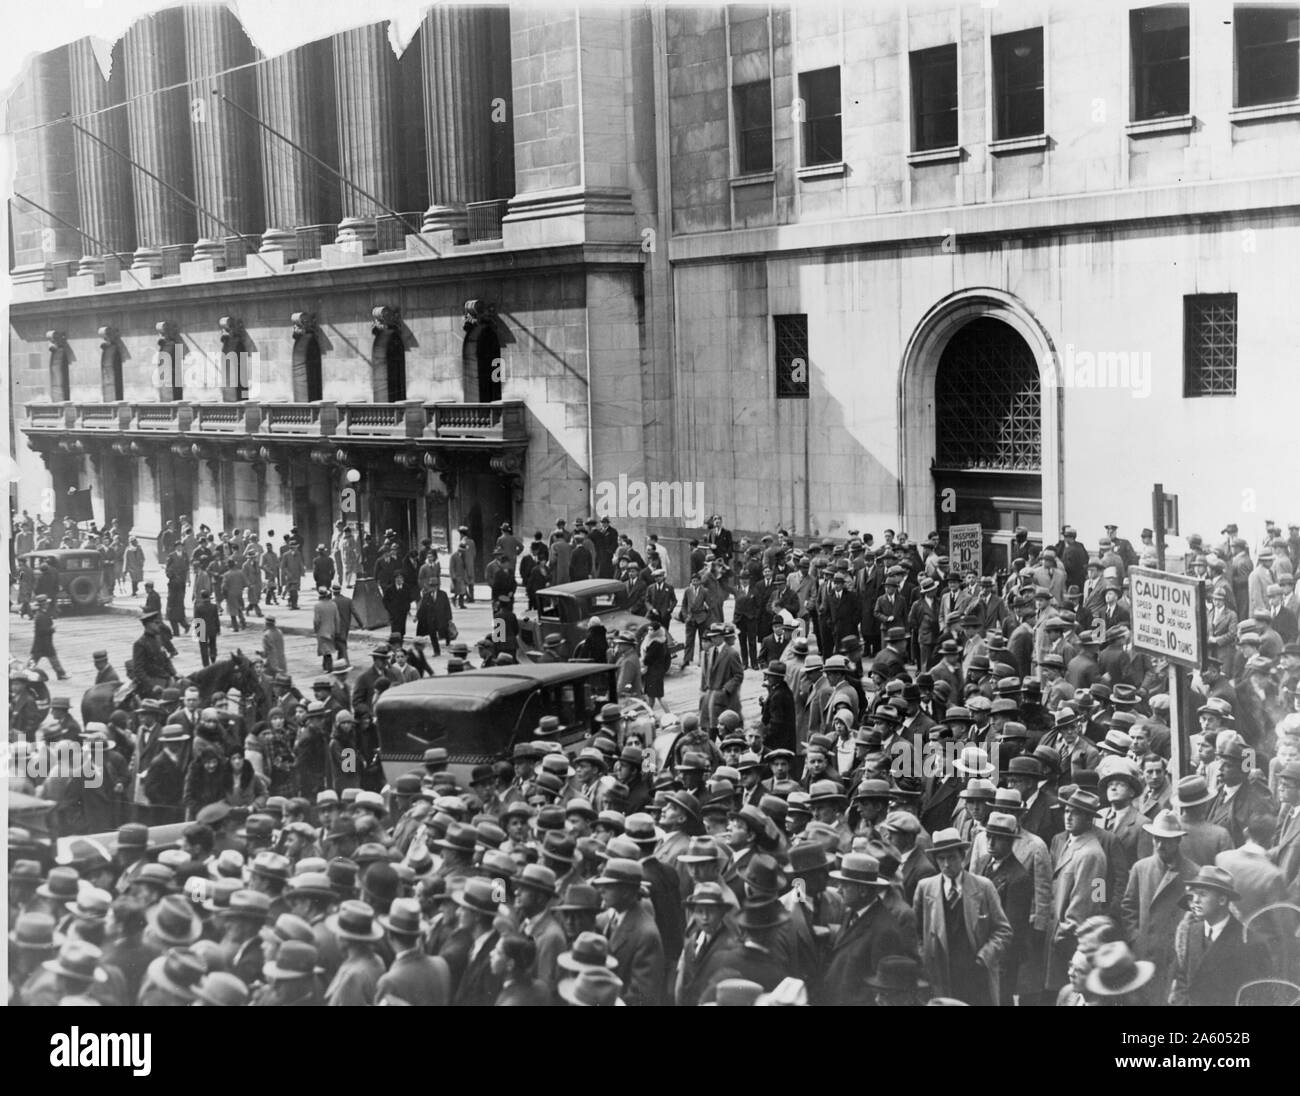 A crowd of people gather outside the New York Stock Exchange following the Crash of 1929. Also known as Black Tuesday it was the most devastating stock market crash in the history of the United States and signalled the beginning of the 10-year Great Depression that affected all of the Western industrialized countries. Stock Photo